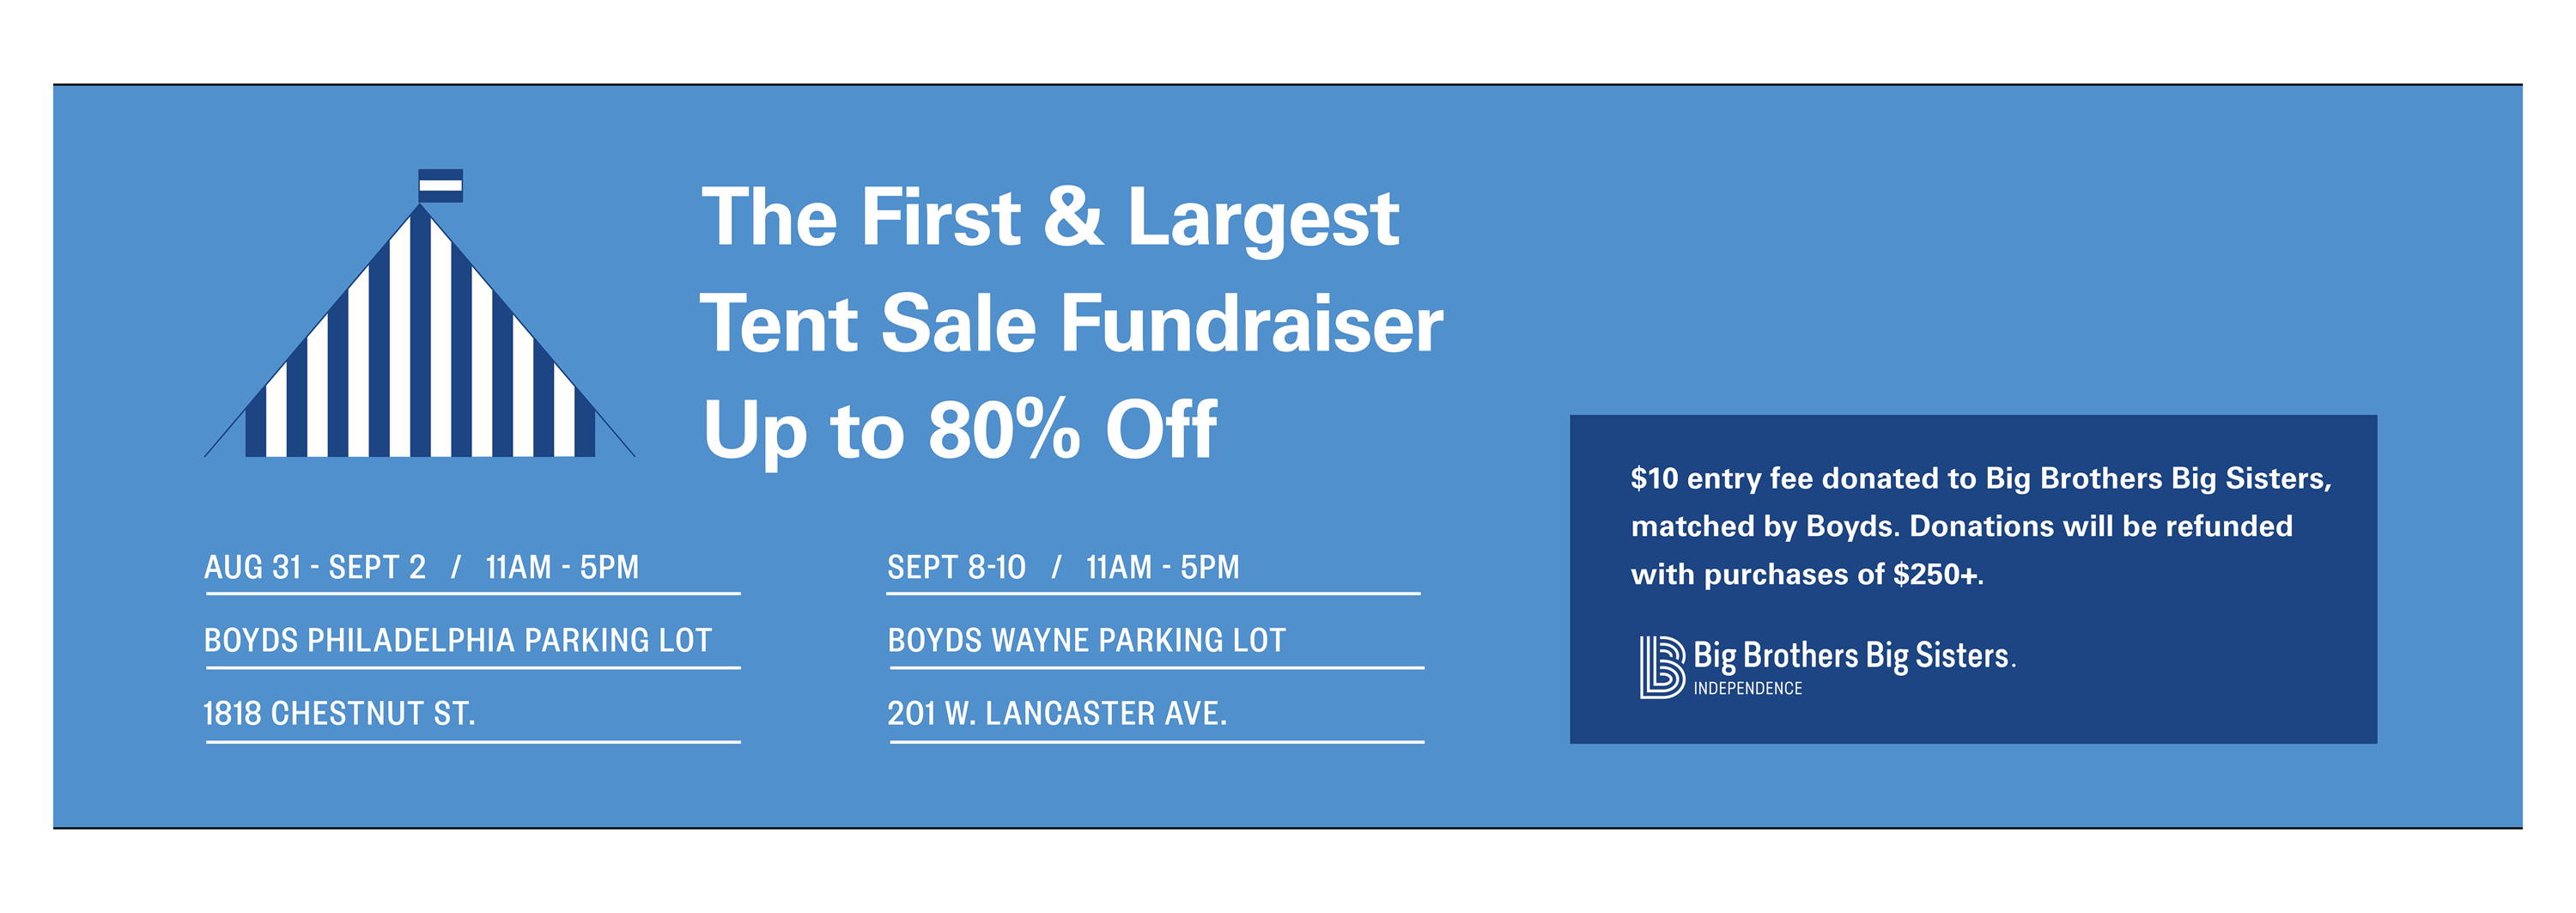 The First & Largest Tent Sale Fundraiser - up to 80% Off